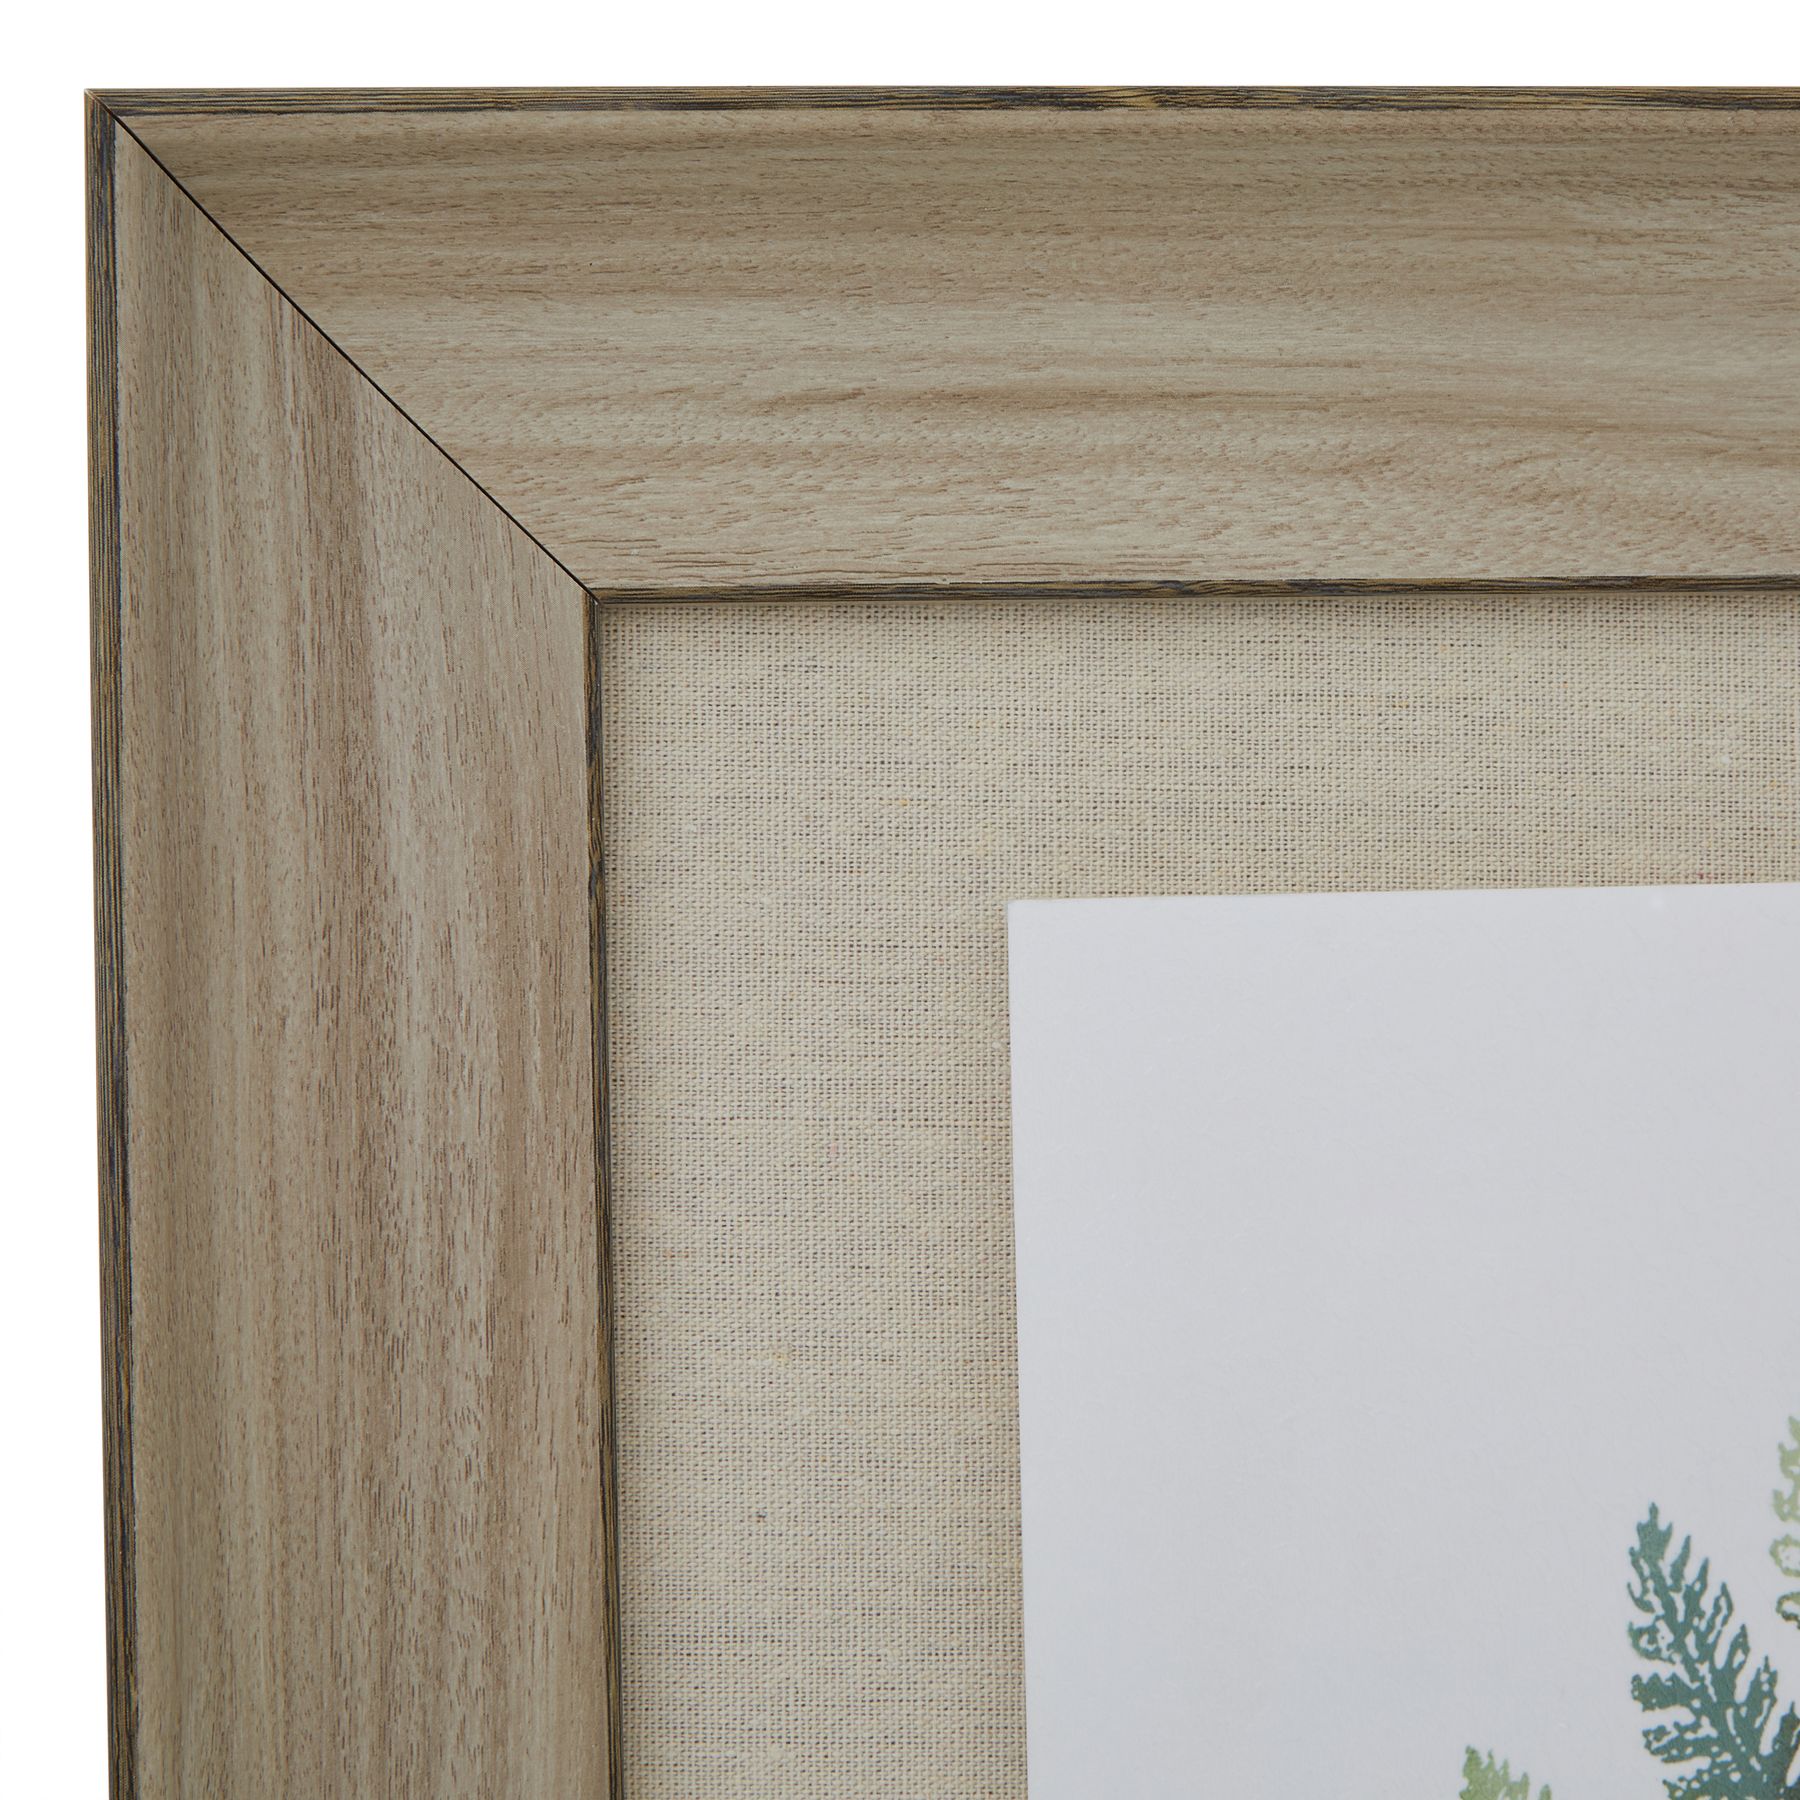 Watercolour Fern Duo In Washed Wood Frame - Image 2